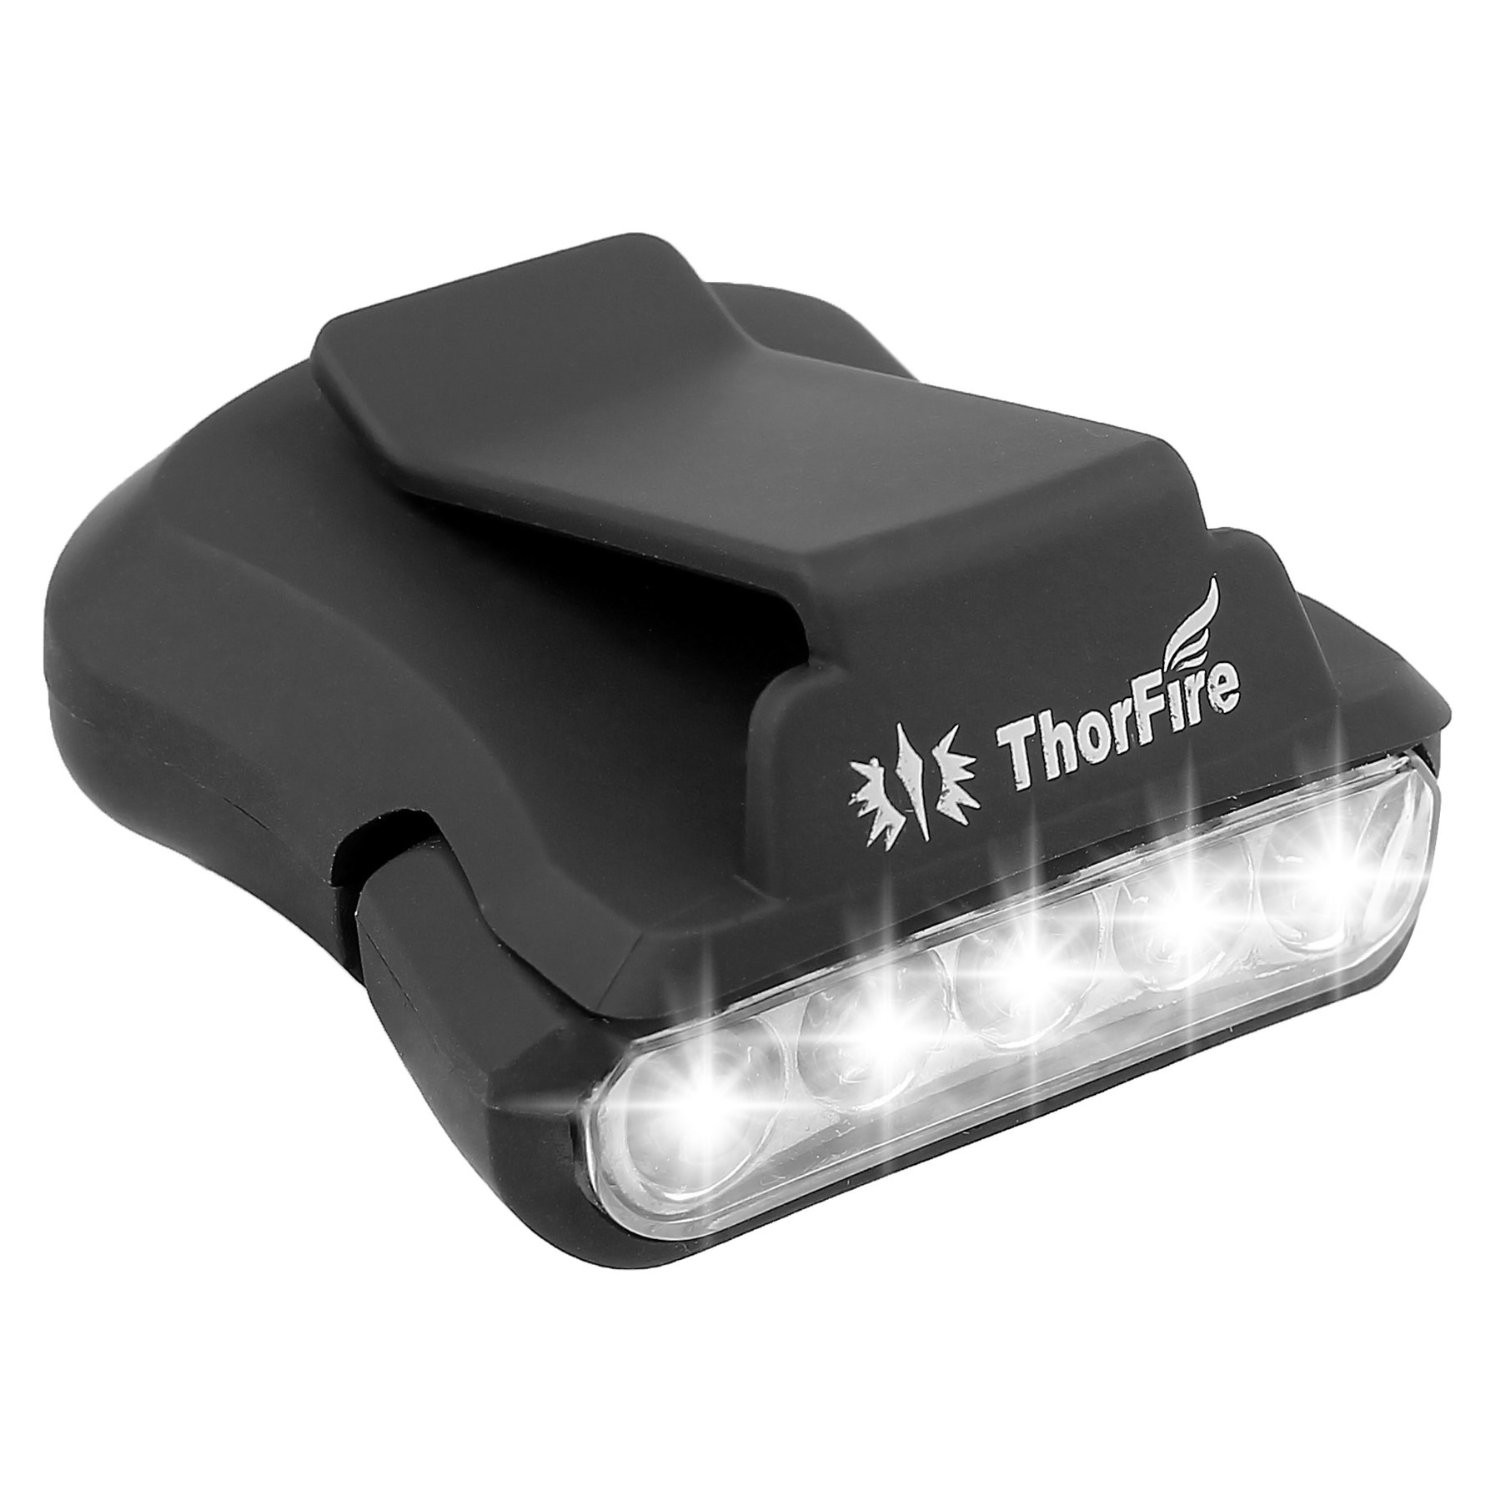 ThorFire-30LM-5-LED-Hat-Clip-Light-Hands-Free-Rotatable-Ball-Cap-Visor-Light-Perfect-for-Hunting-Cam-1114220-6